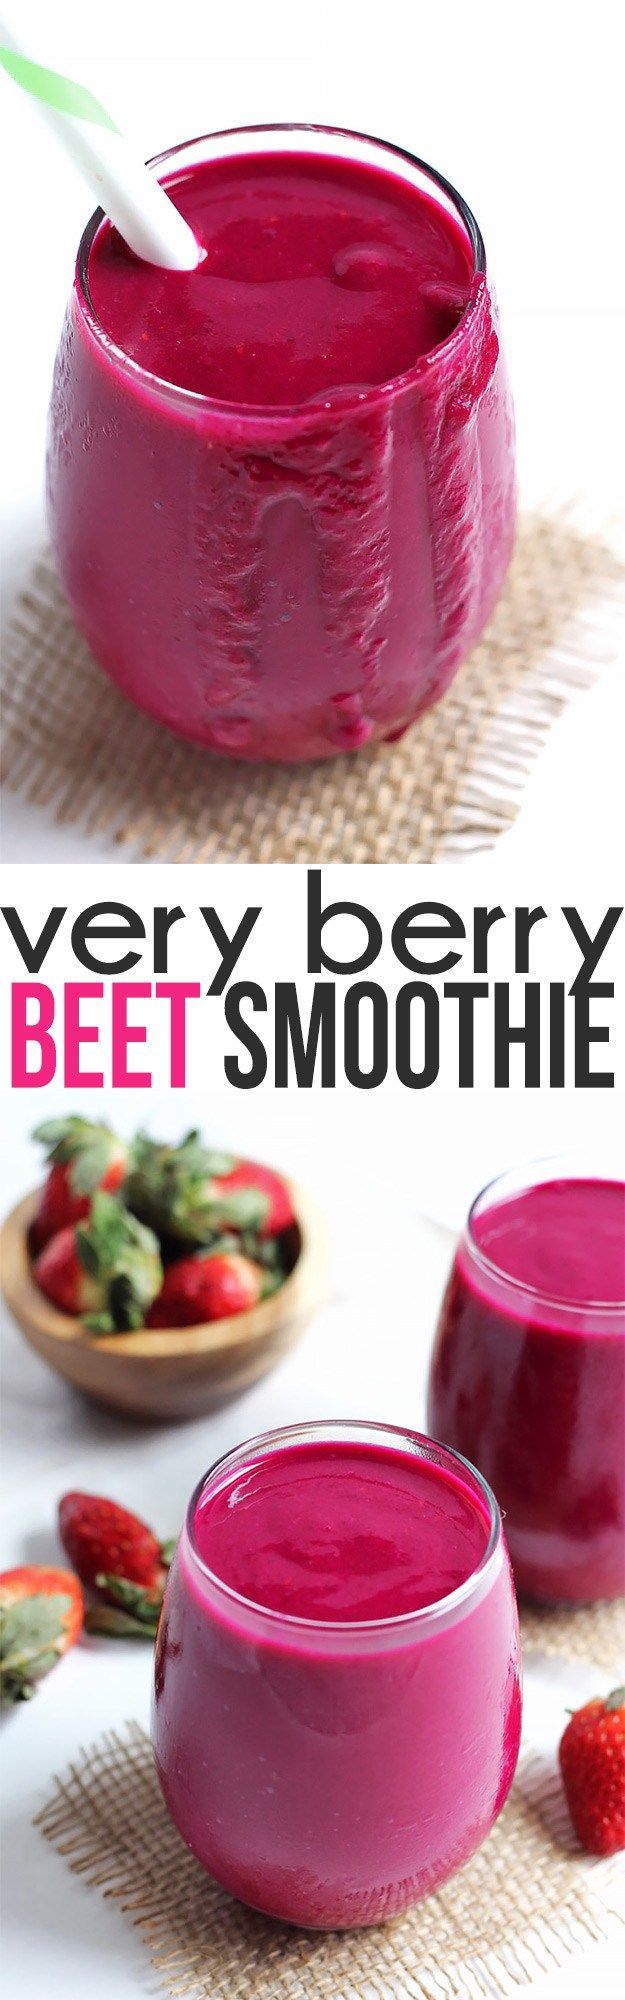 If you find it hard to get your veggies in, you need this Very Berry Beet Smoothie! Its perfect for a super nutritious breakfast